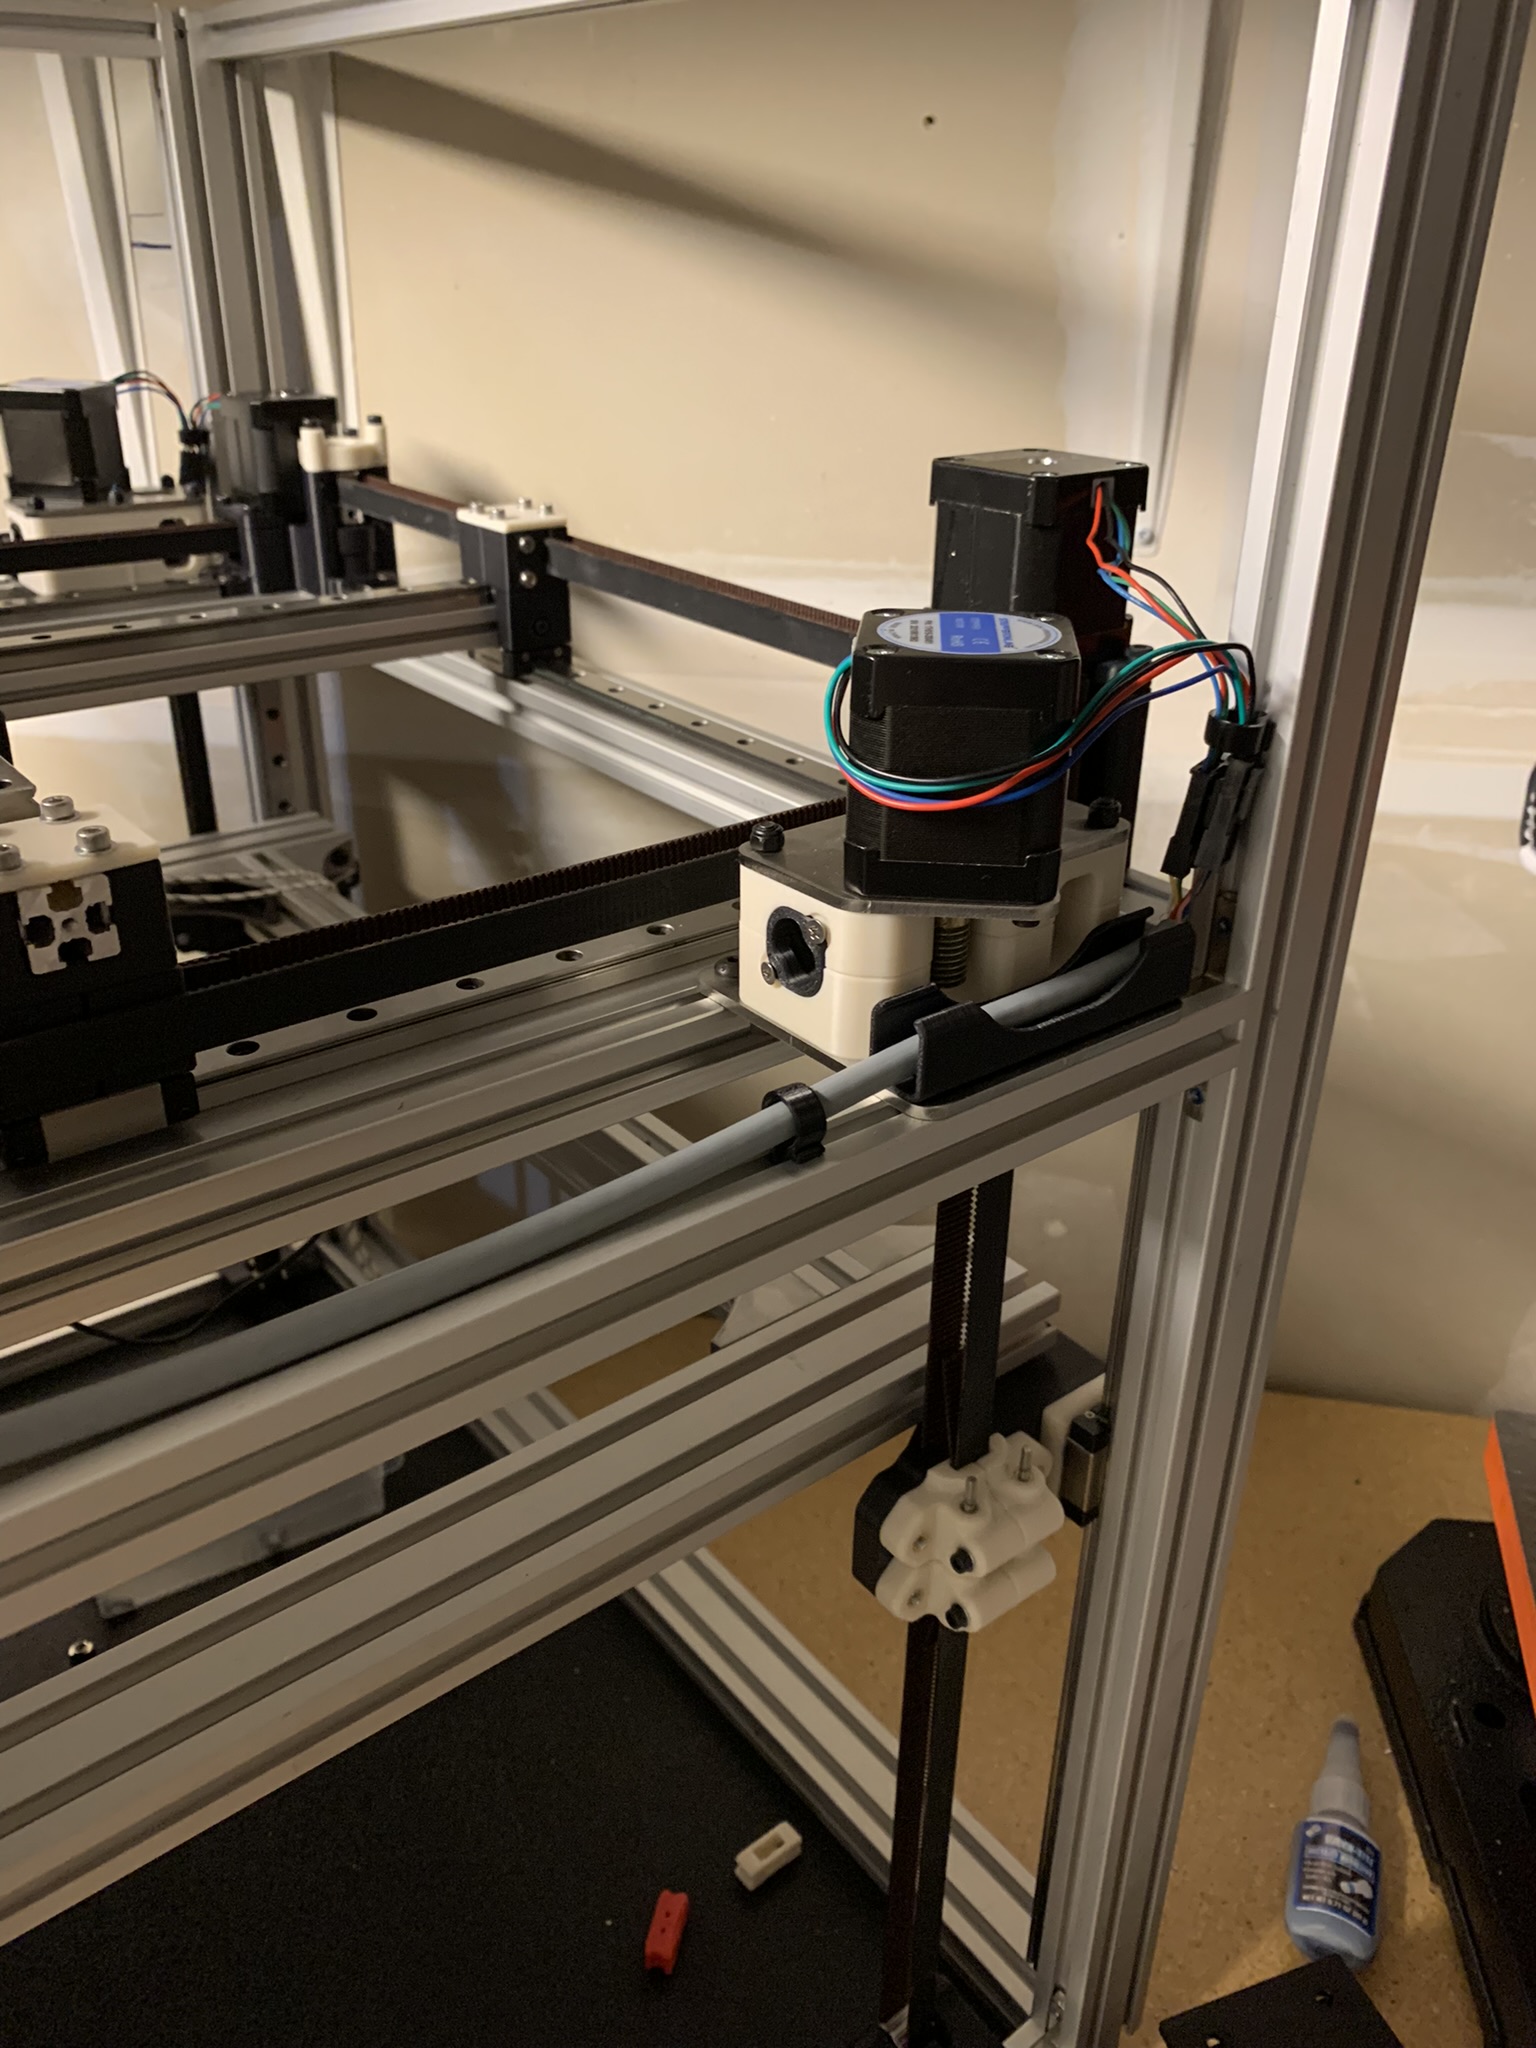 X and Z motor wires connected to extrusion using printed clips